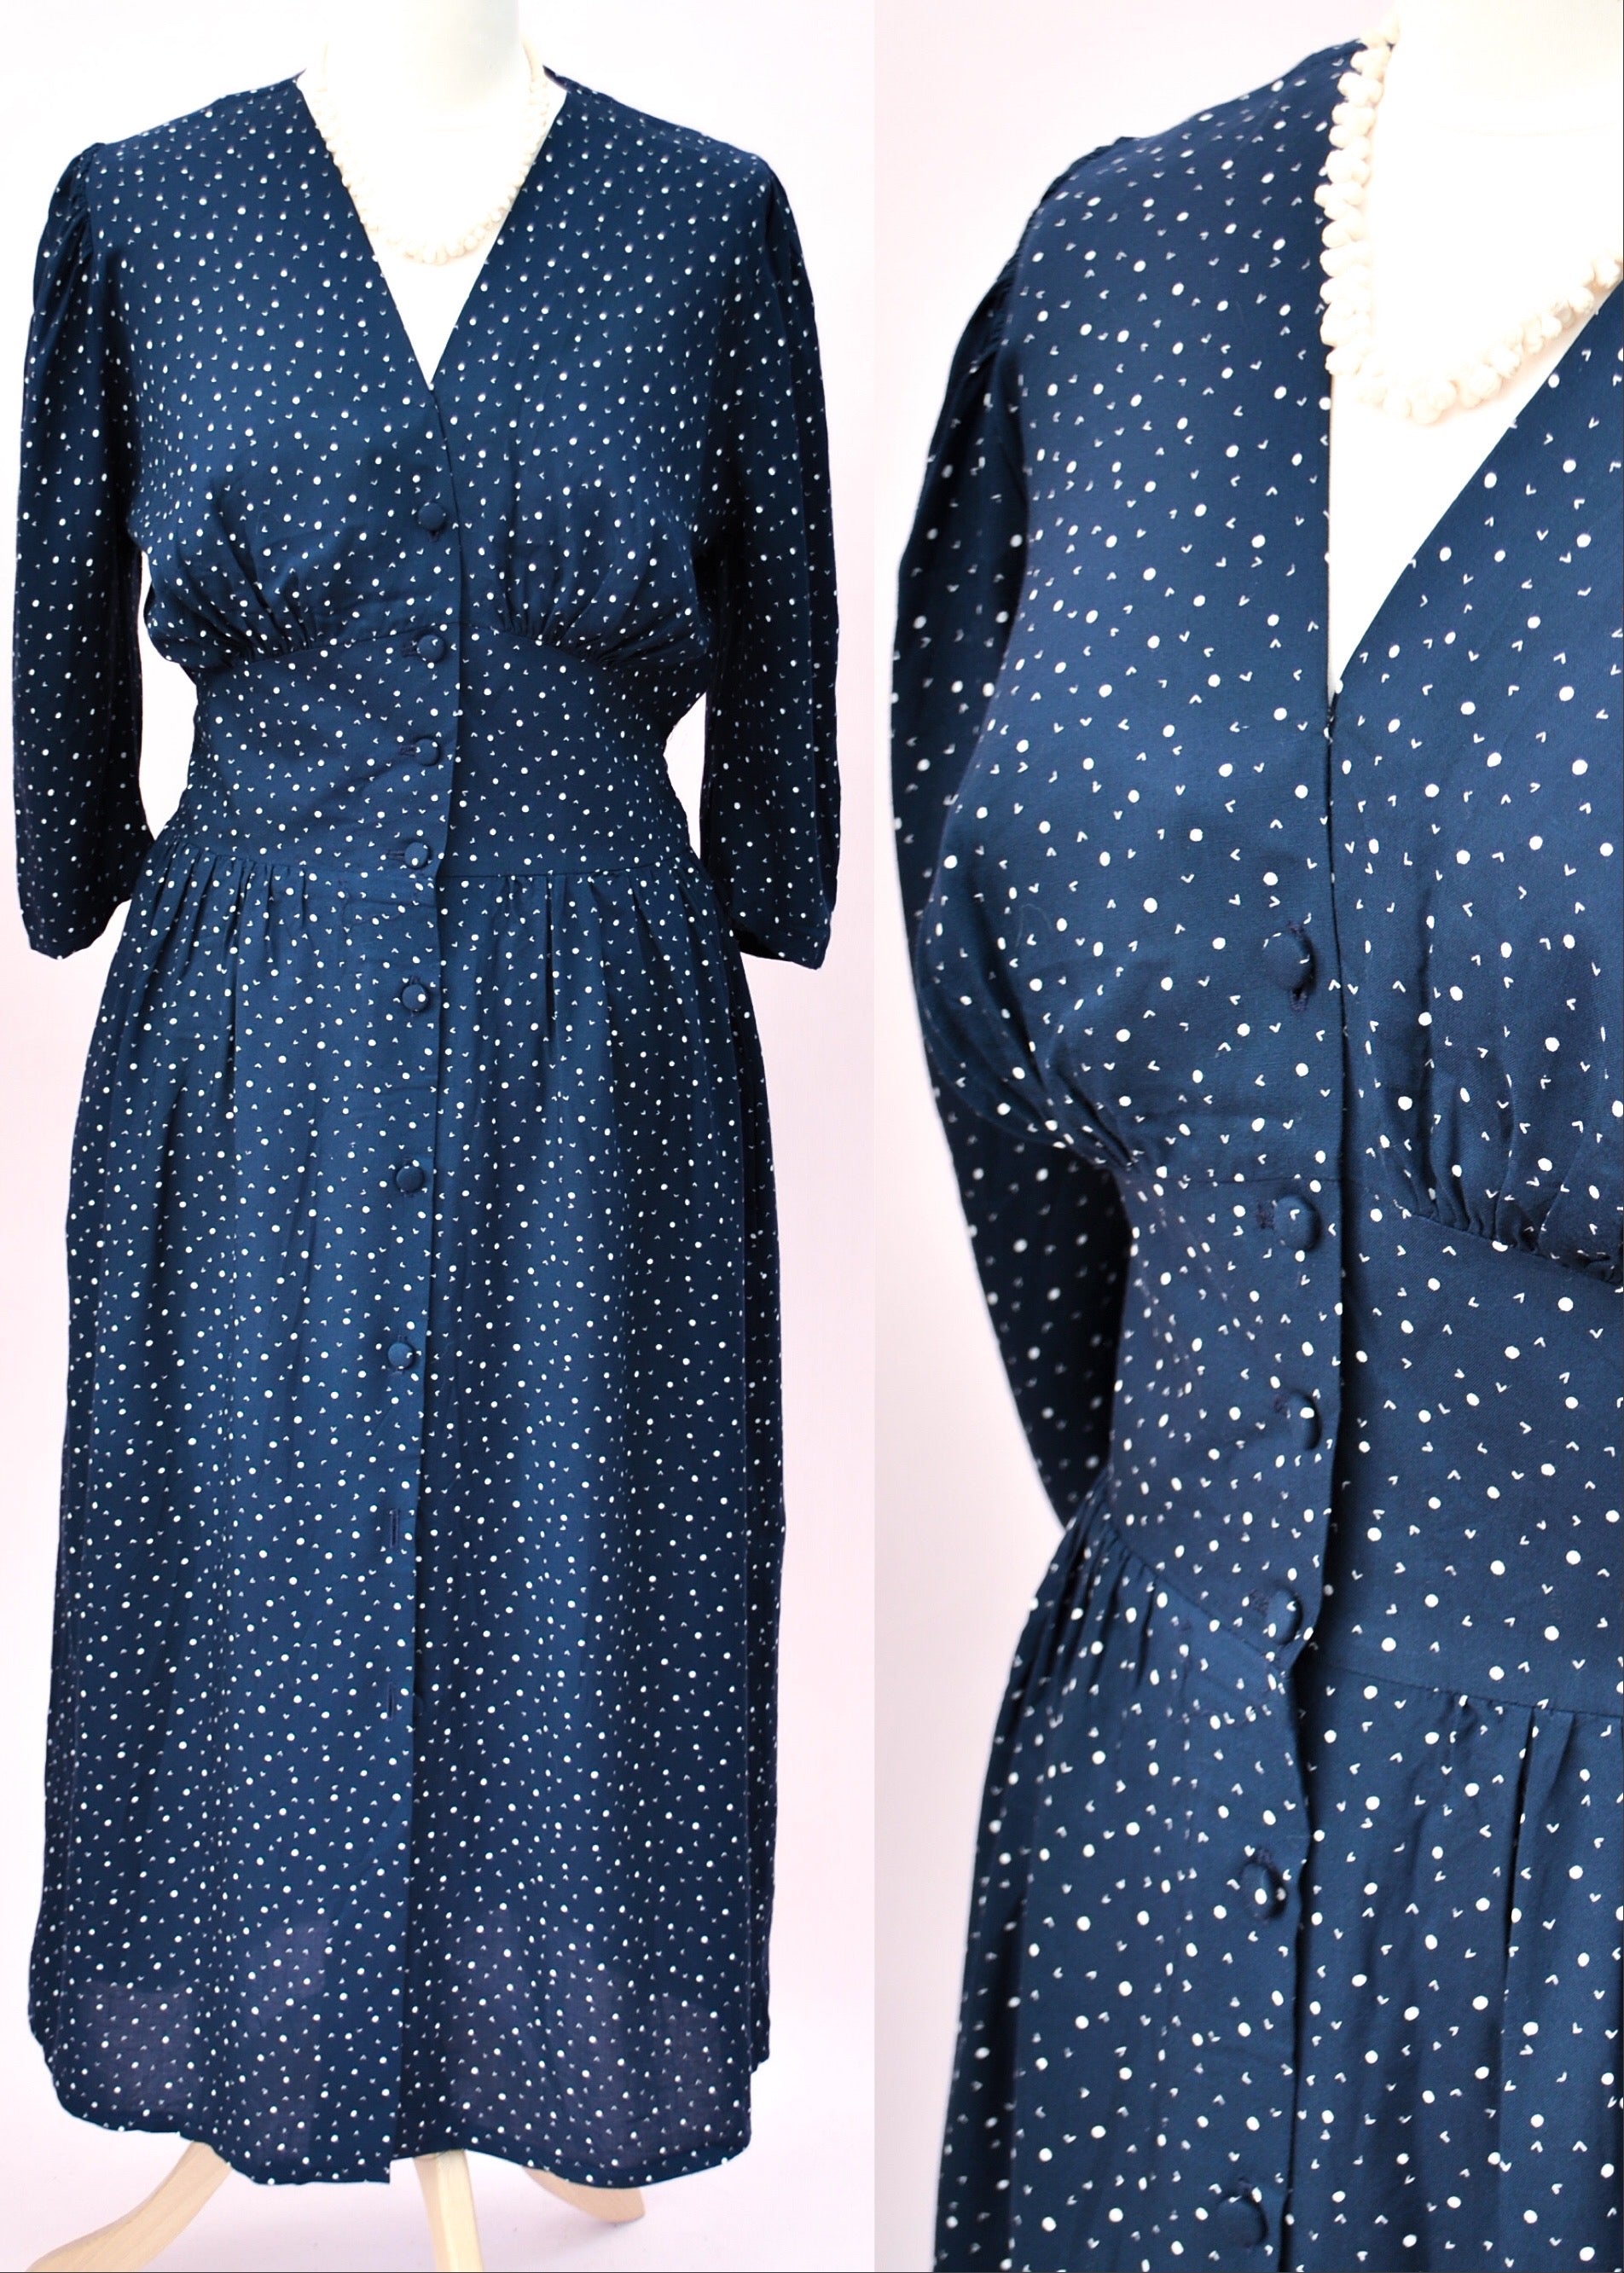 Vintage mary quant tea dress, blue with white spots